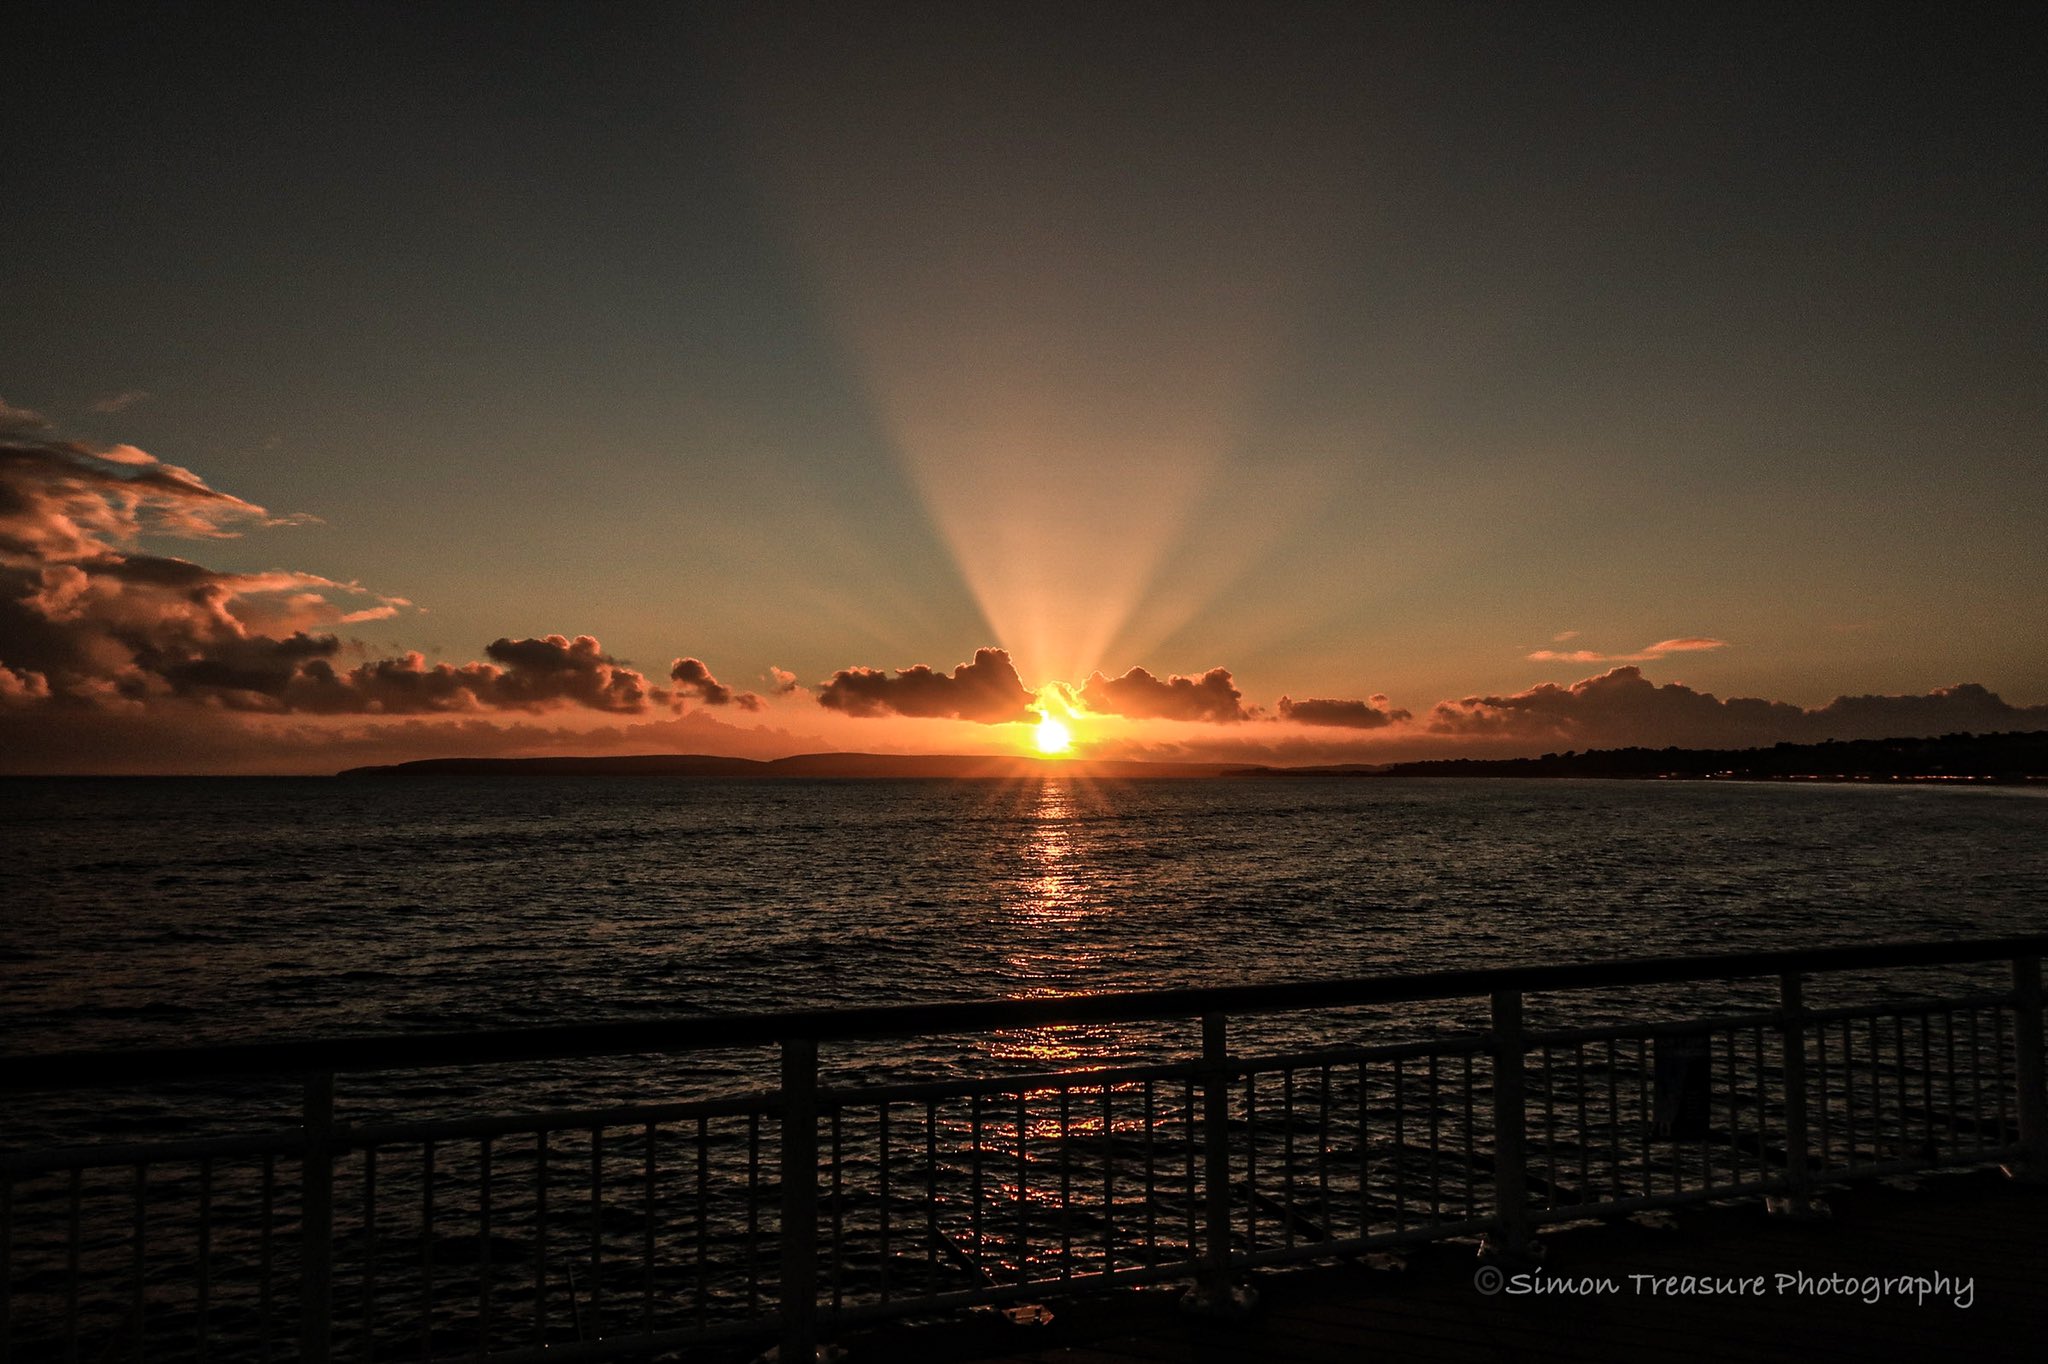 3rd Place Sun setting with Crepuscular rays over Purbeck hills & Poole Bay Bournemouth by Simon Treasure @Simon_Treasure